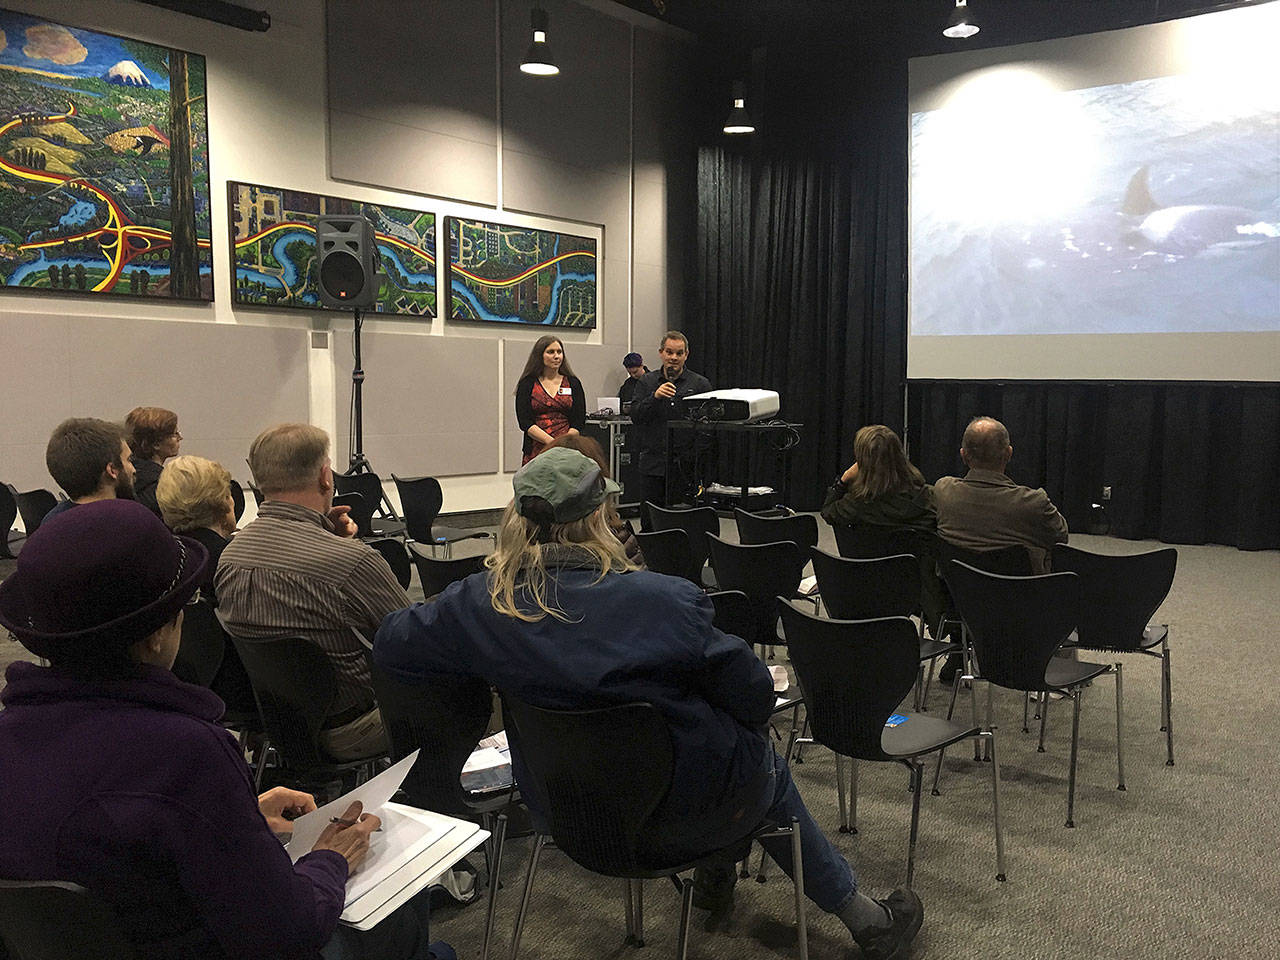 Kathleen Pozarycki and Florian Graner speak at an “Our Coast” film series event. Photo courtesy of Snohomish County Marine Resources Committee